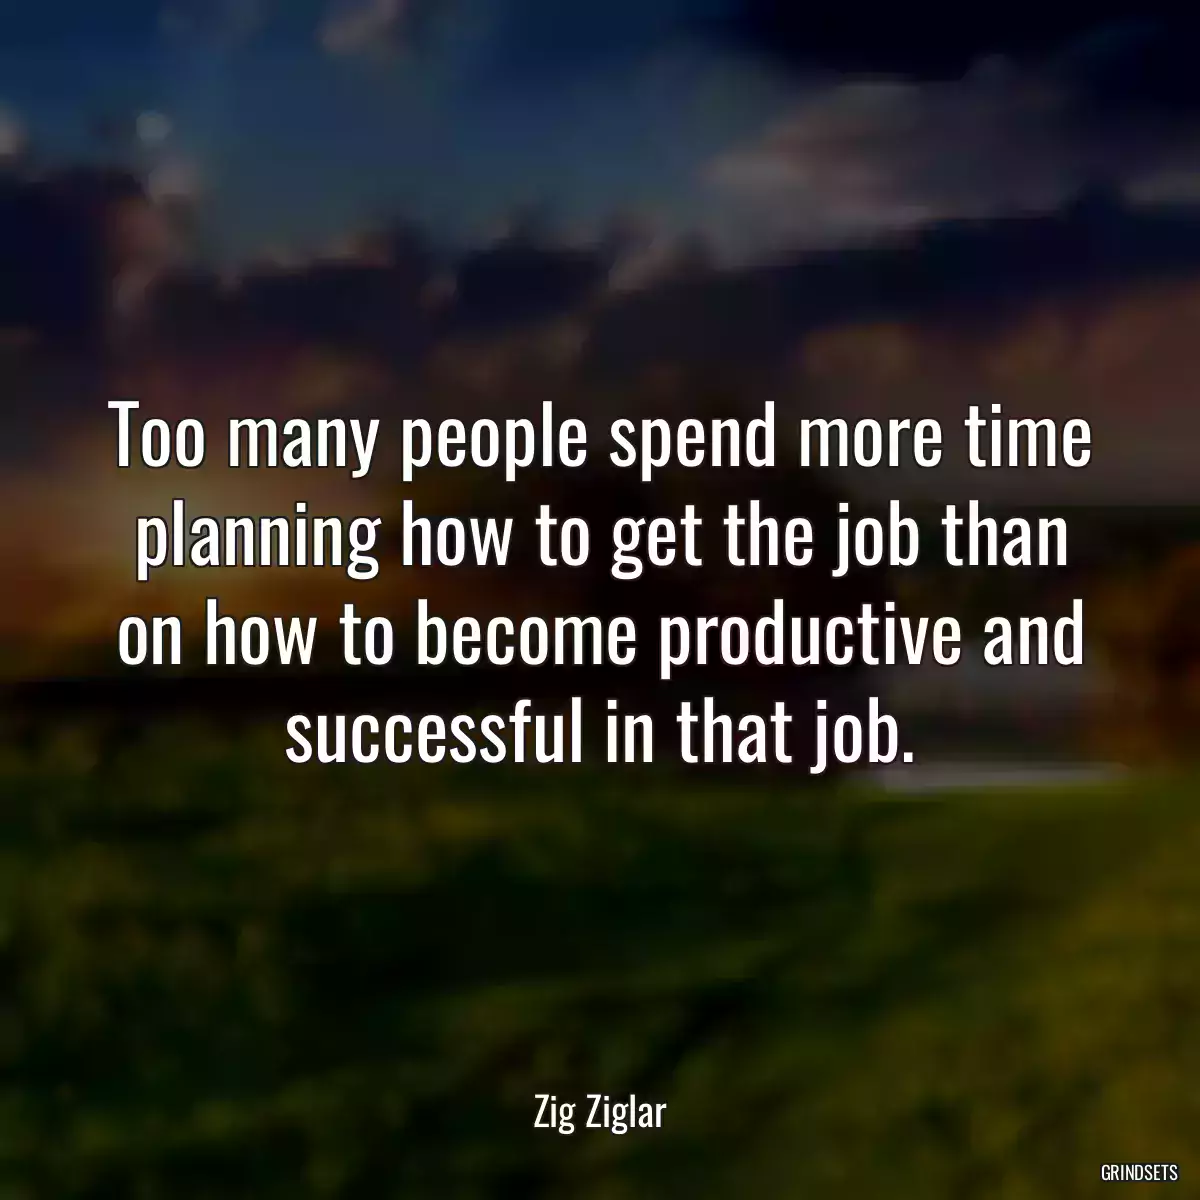 Too many people spend more time planning how to get the job than on how to become productive and successful in that job.